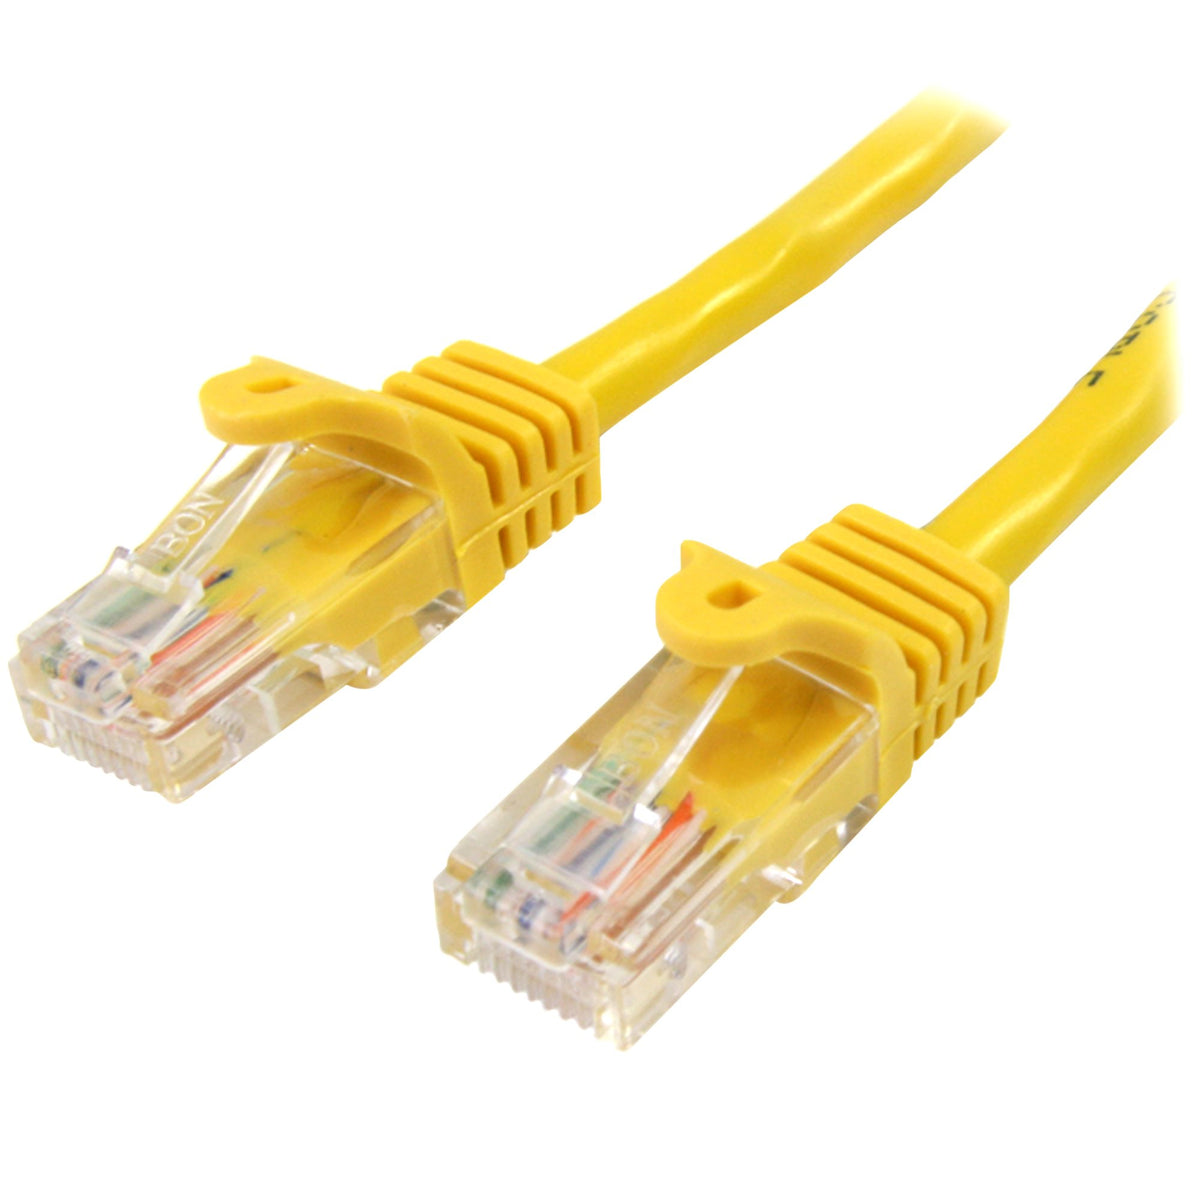 StarTech.com Cat5e Patch Cable with Snagless RJ45 Connectors - 2m, Yellow